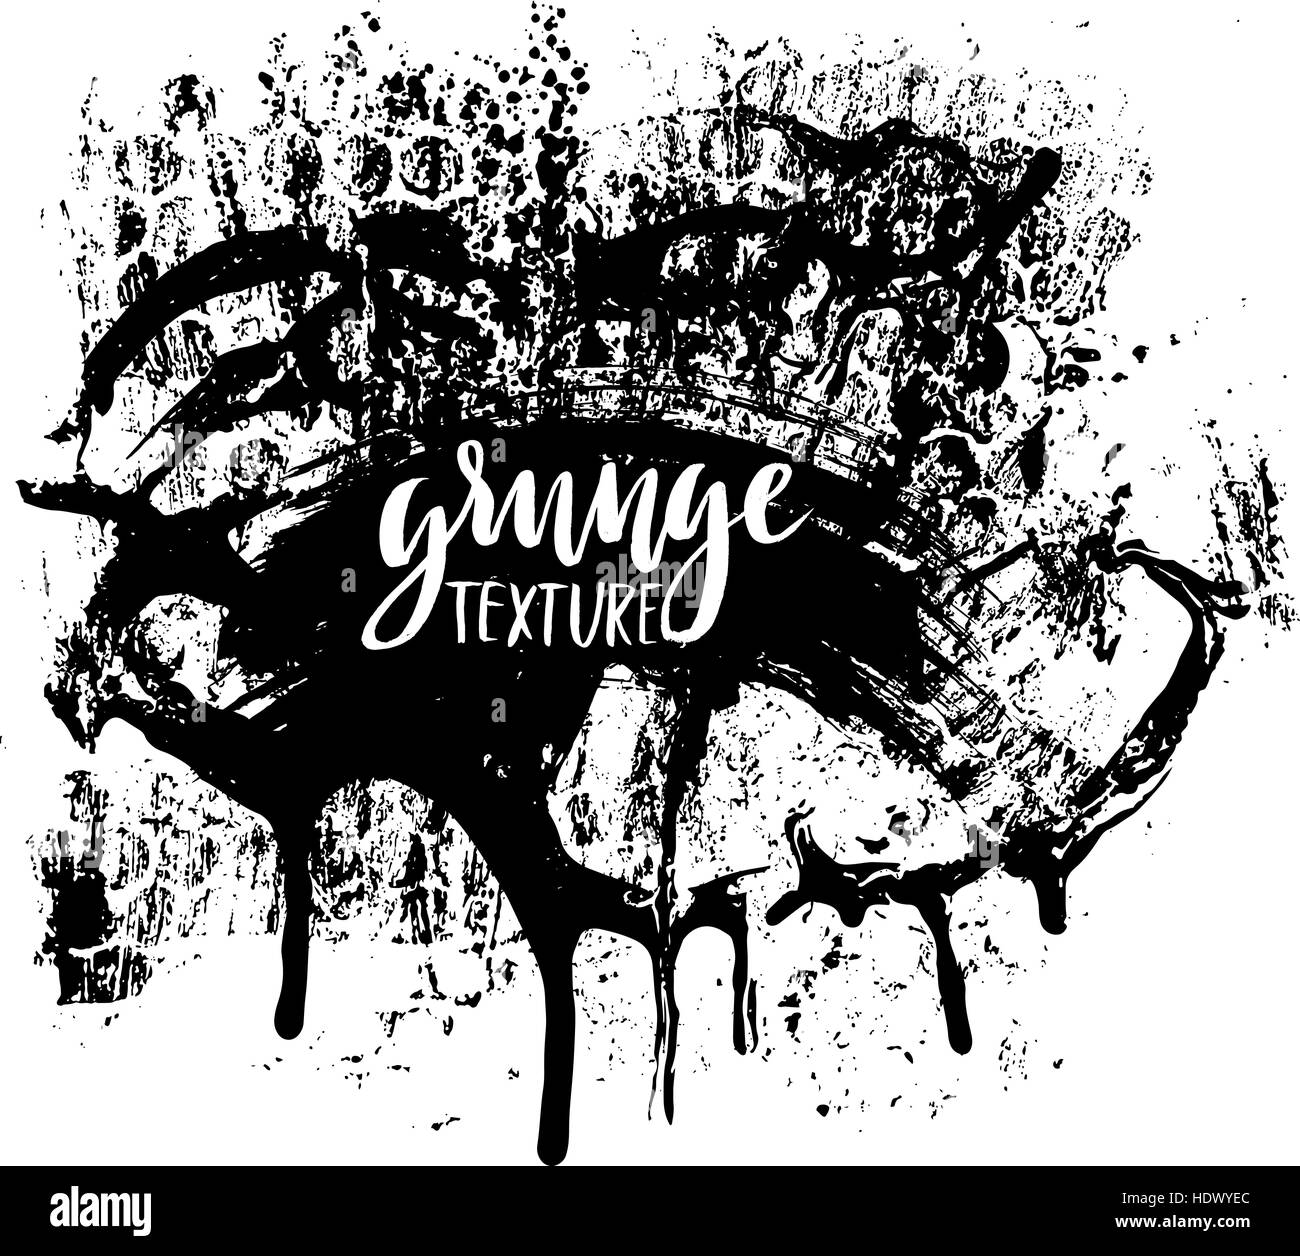 Splatter Paint Texture. Grunge background. Black Blot of Ink. Place for Text. Grungy Effect Stump. Vector illustration. Stock Vector